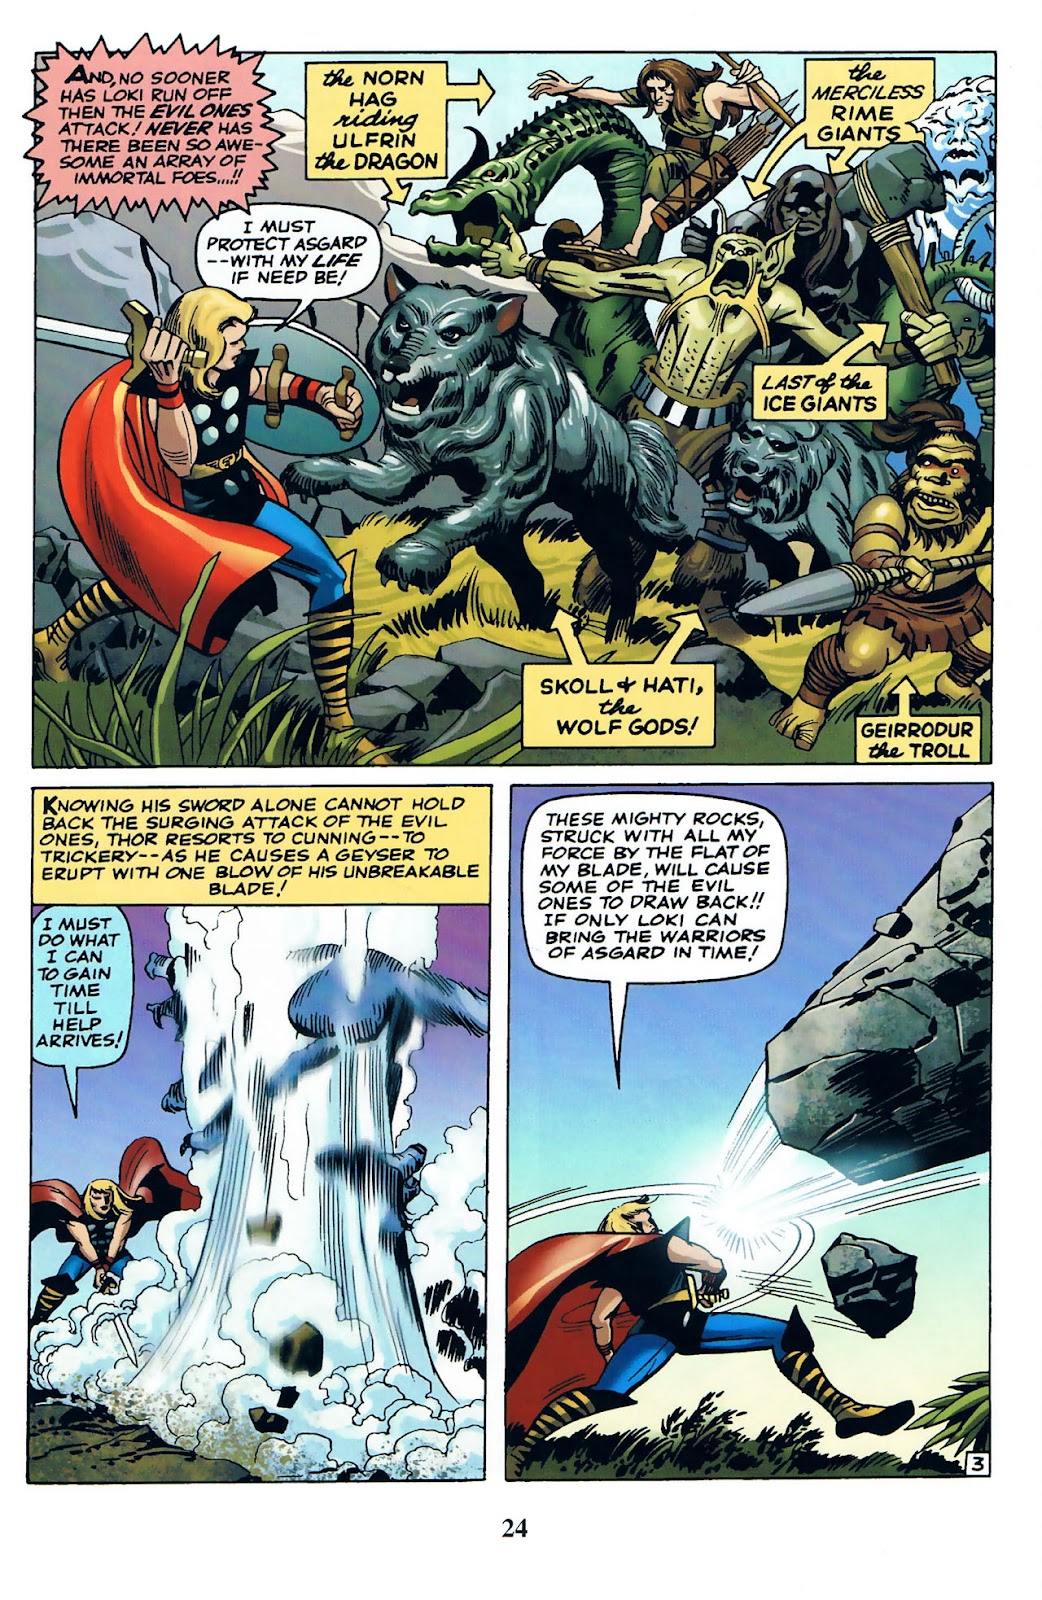 Thor: Tales of Asgard by Stan Lee & Jack Kirby issue 1 - Page 26